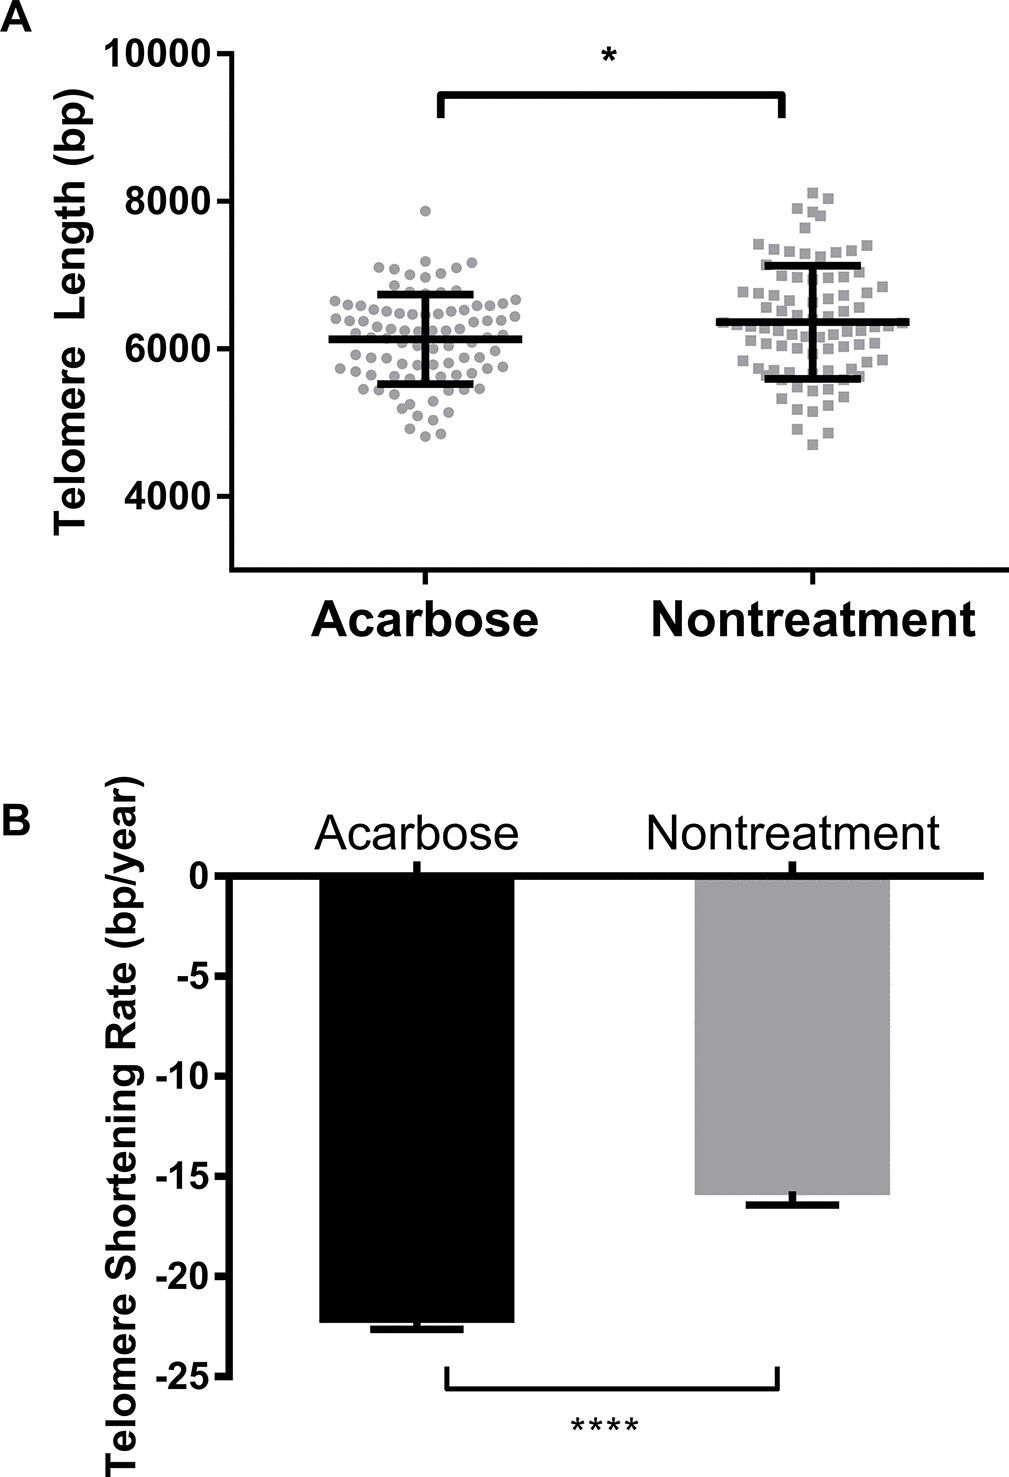 Comparison of telomere length and TSR between acarbose-treated and nontreated T2DM patients. Comparison of telomere length (A) and TSR (B) between the acarbose group and the nontreatment group. Telomere length is presented as the mean ± SD. TSRs are presented as the mean ± SEM. *indicates P P 